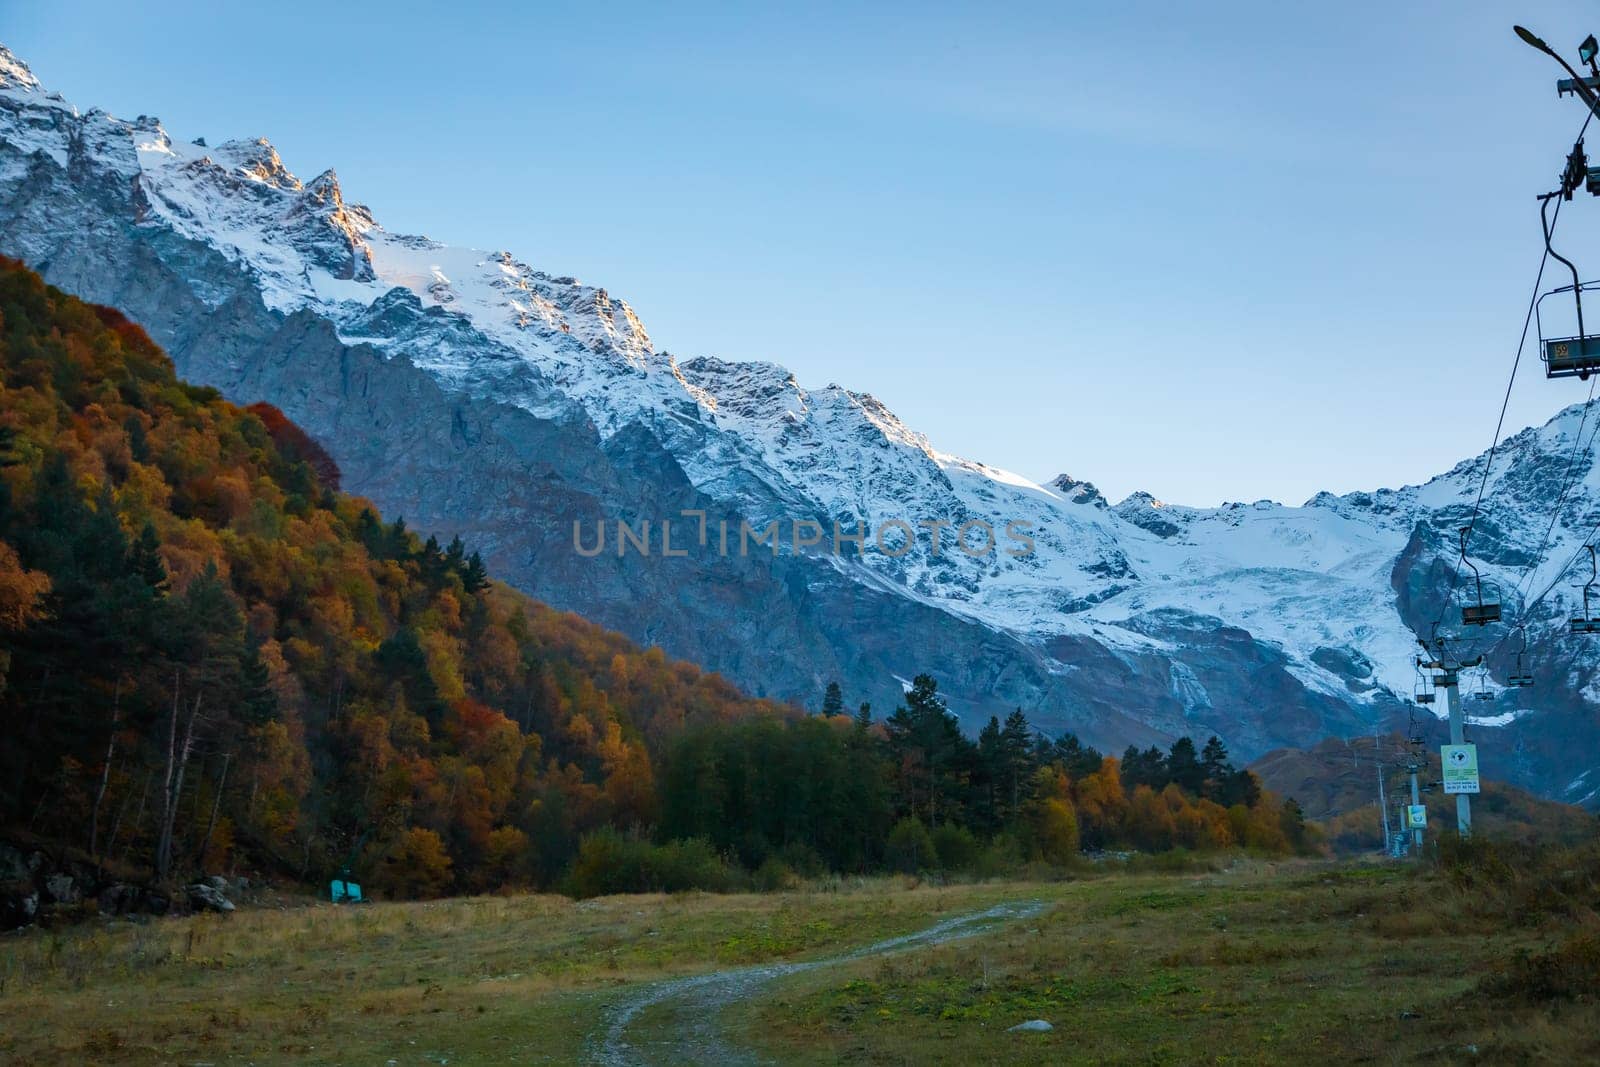 Impeccable mountain views with glacier covered in snow and ice